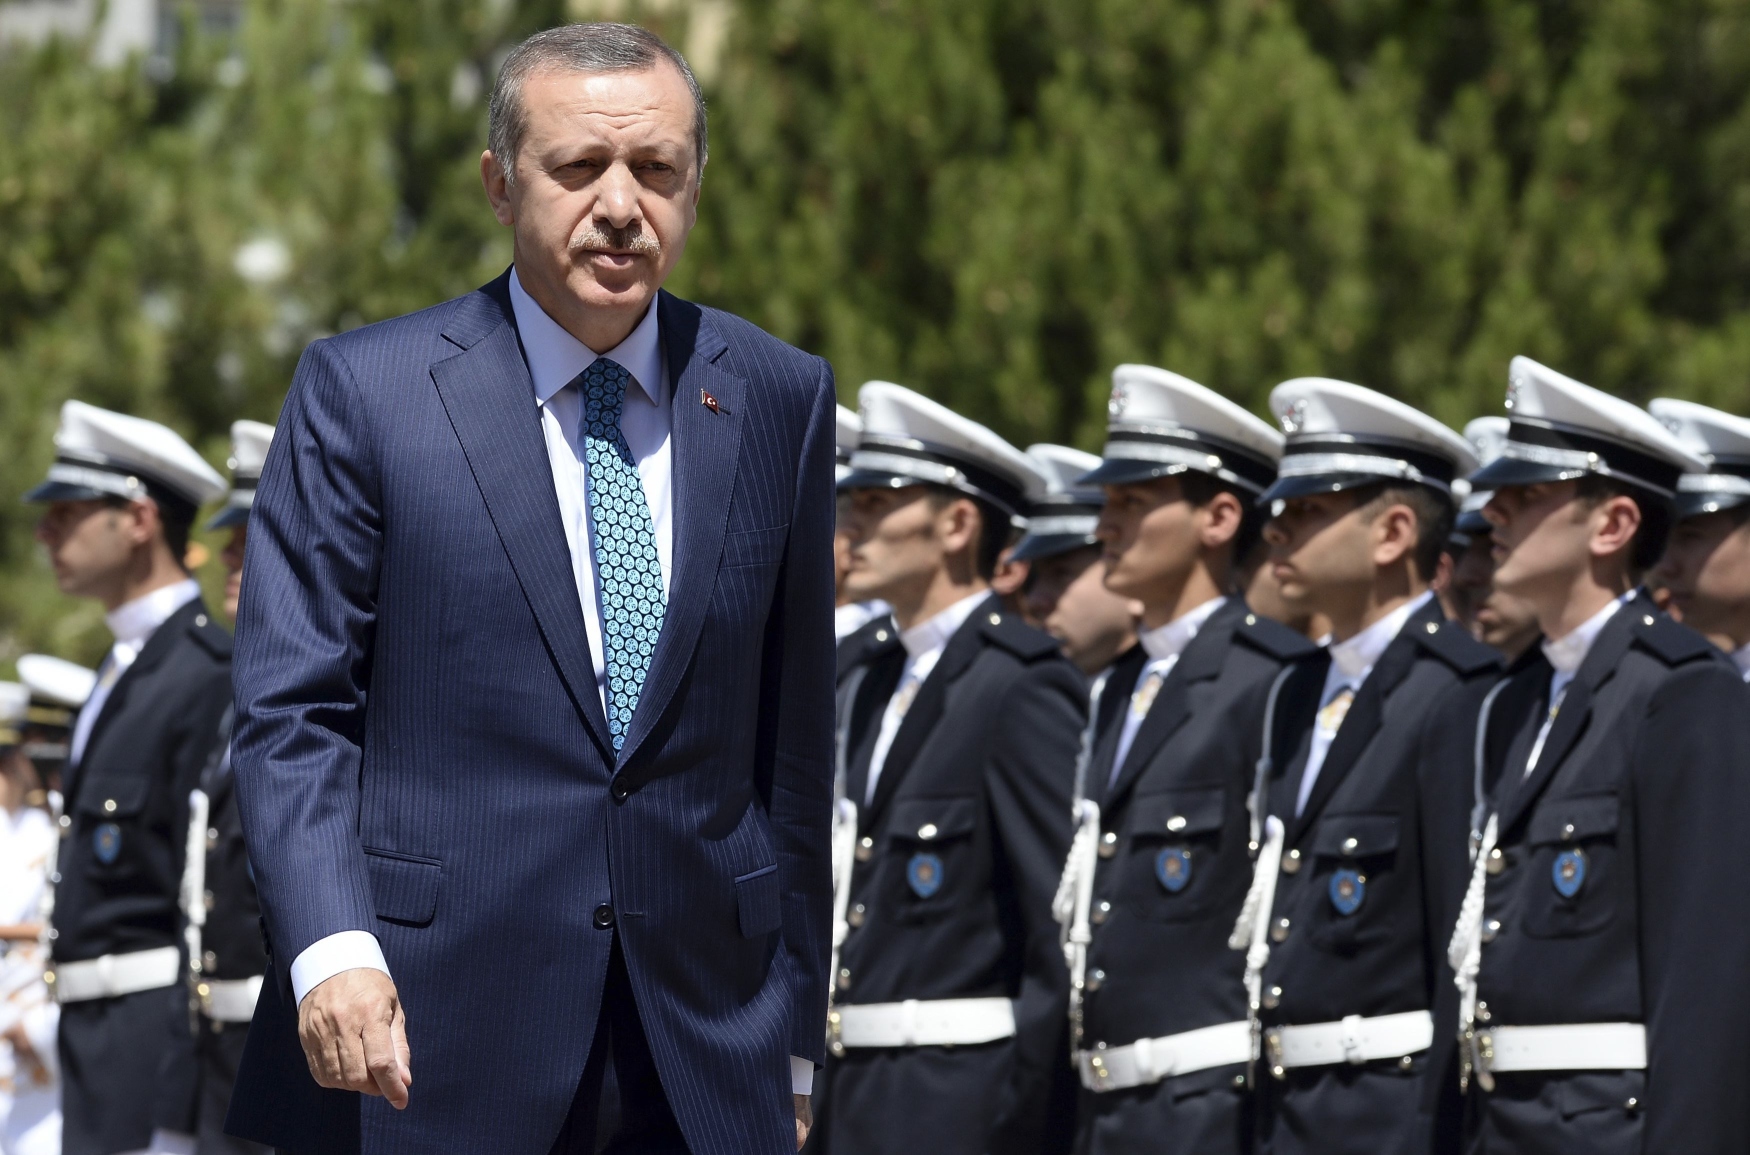 Turkey's Prime Minister Tayyip Erdogan (left). Turkish police have raided homes in the capital, Ankara, detaining people involved in protests against Erdogan's government. Photo: Reuters